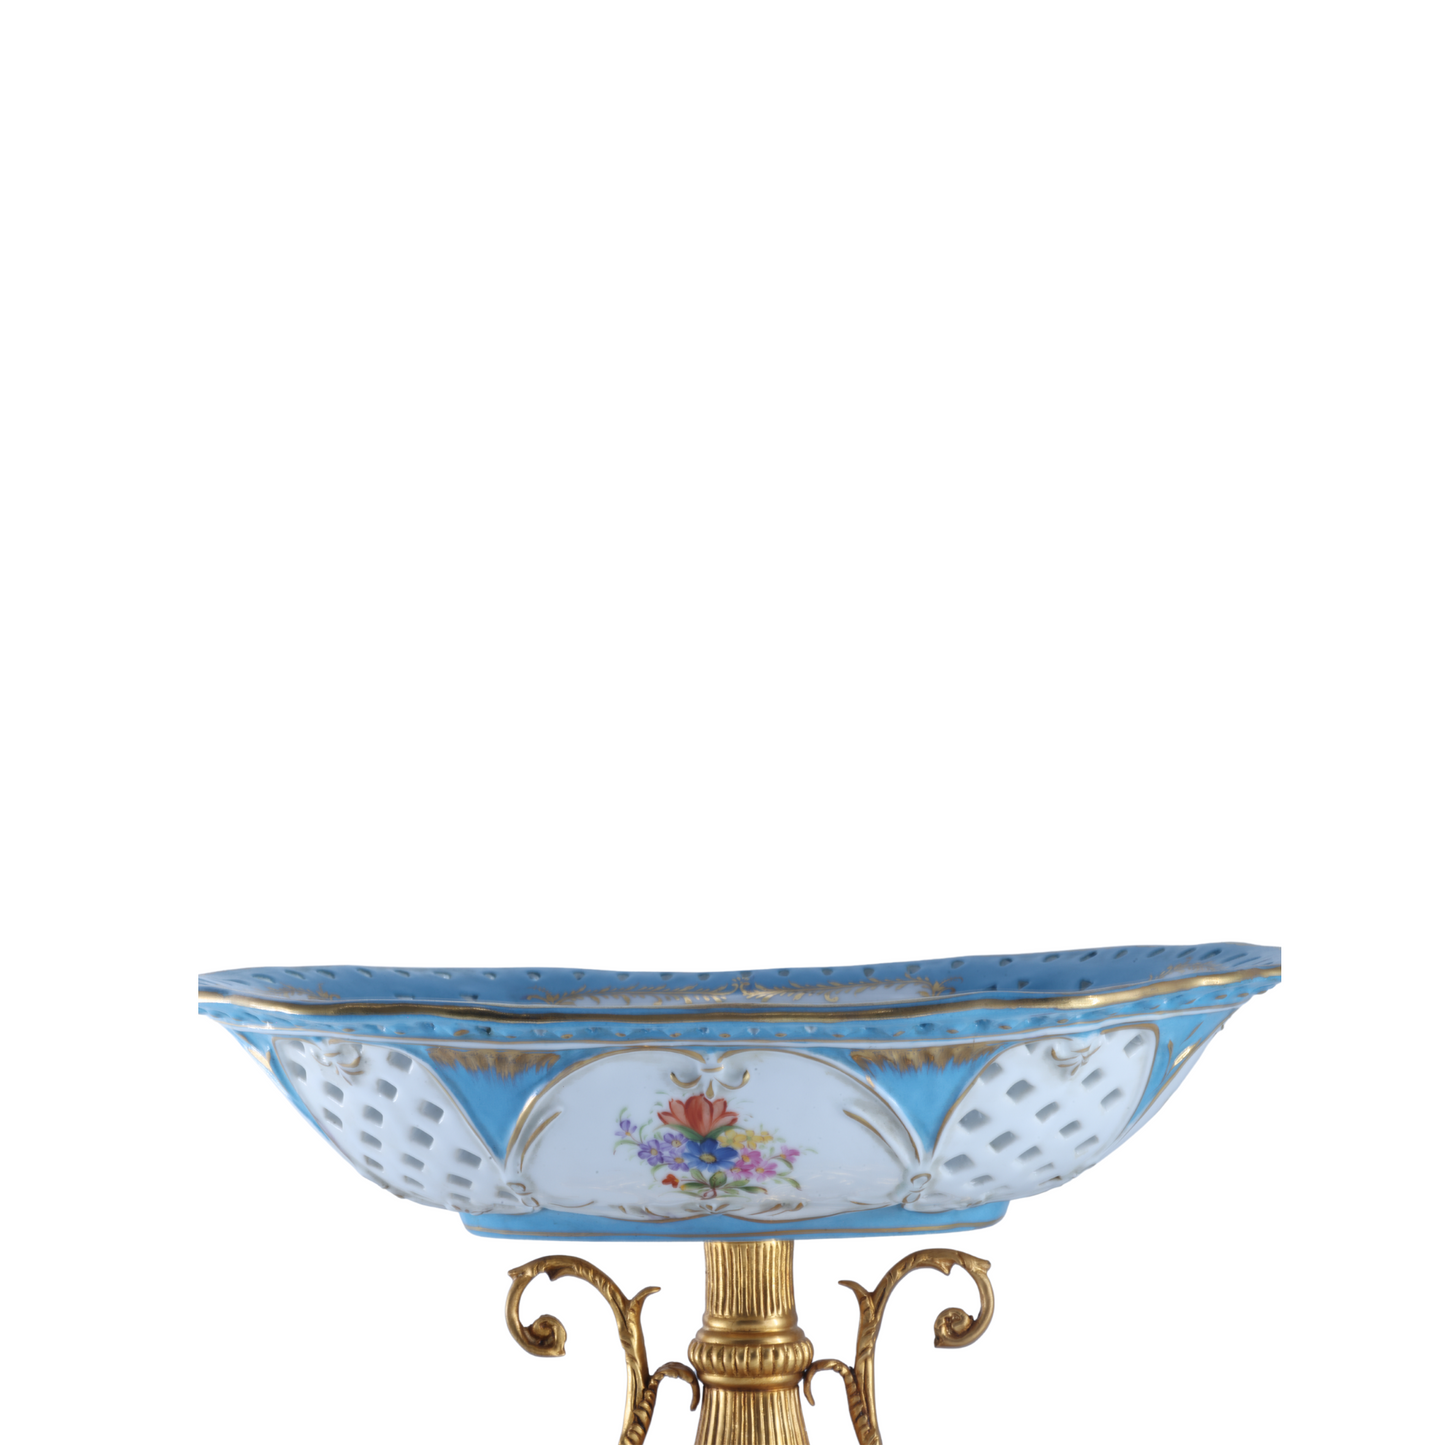 Oval Fruit Bowl With Baroque Floral Motif